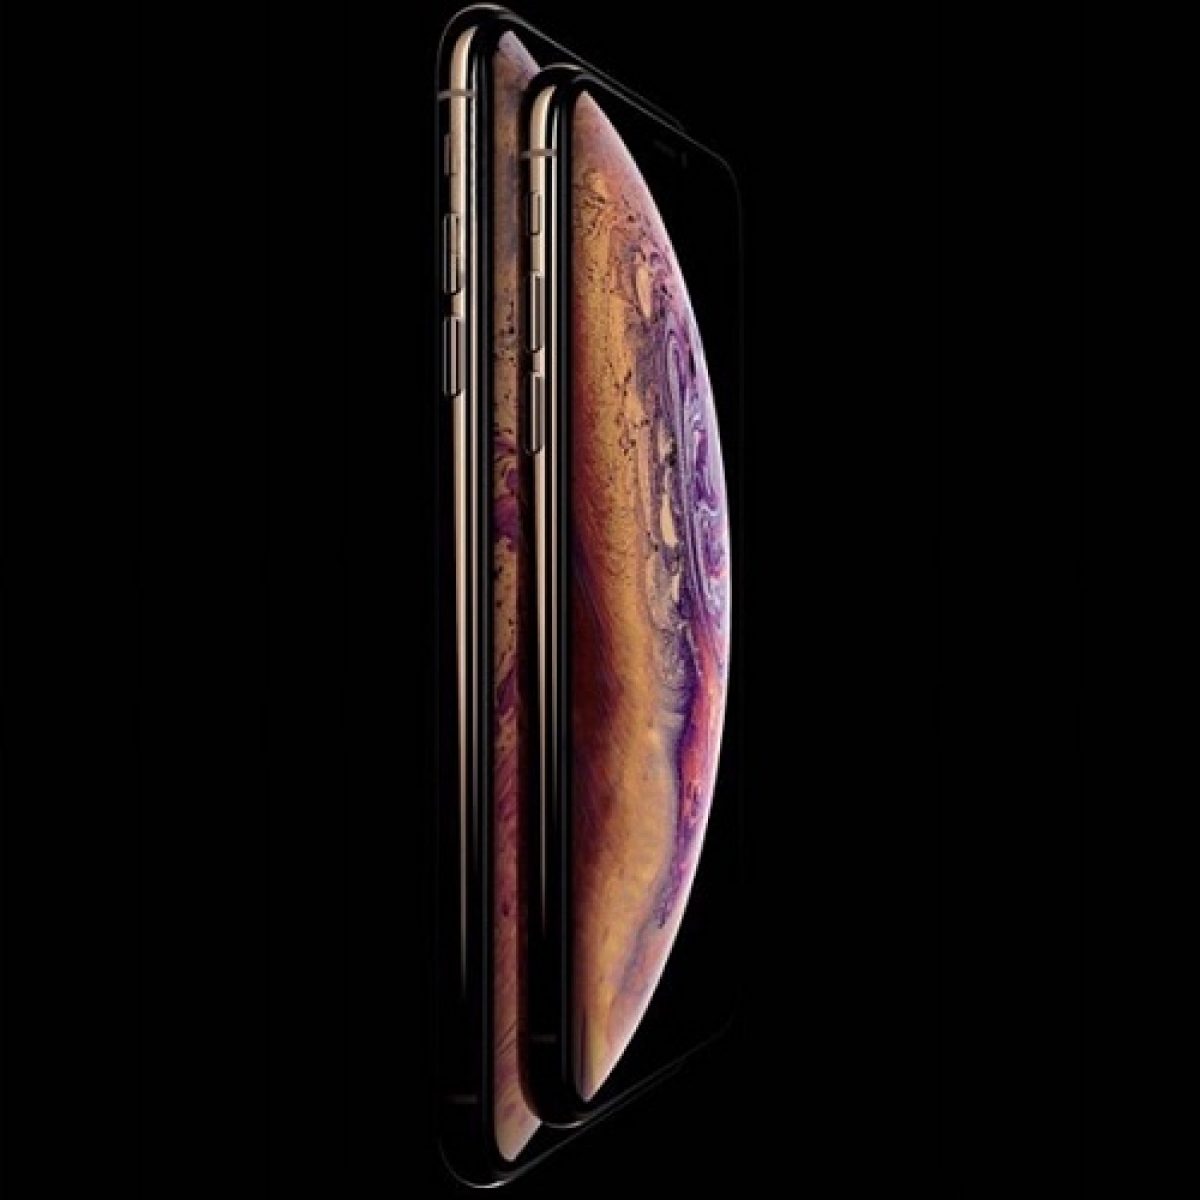 Download The 2018 iPhone XS Soap Bubble Wallpaper